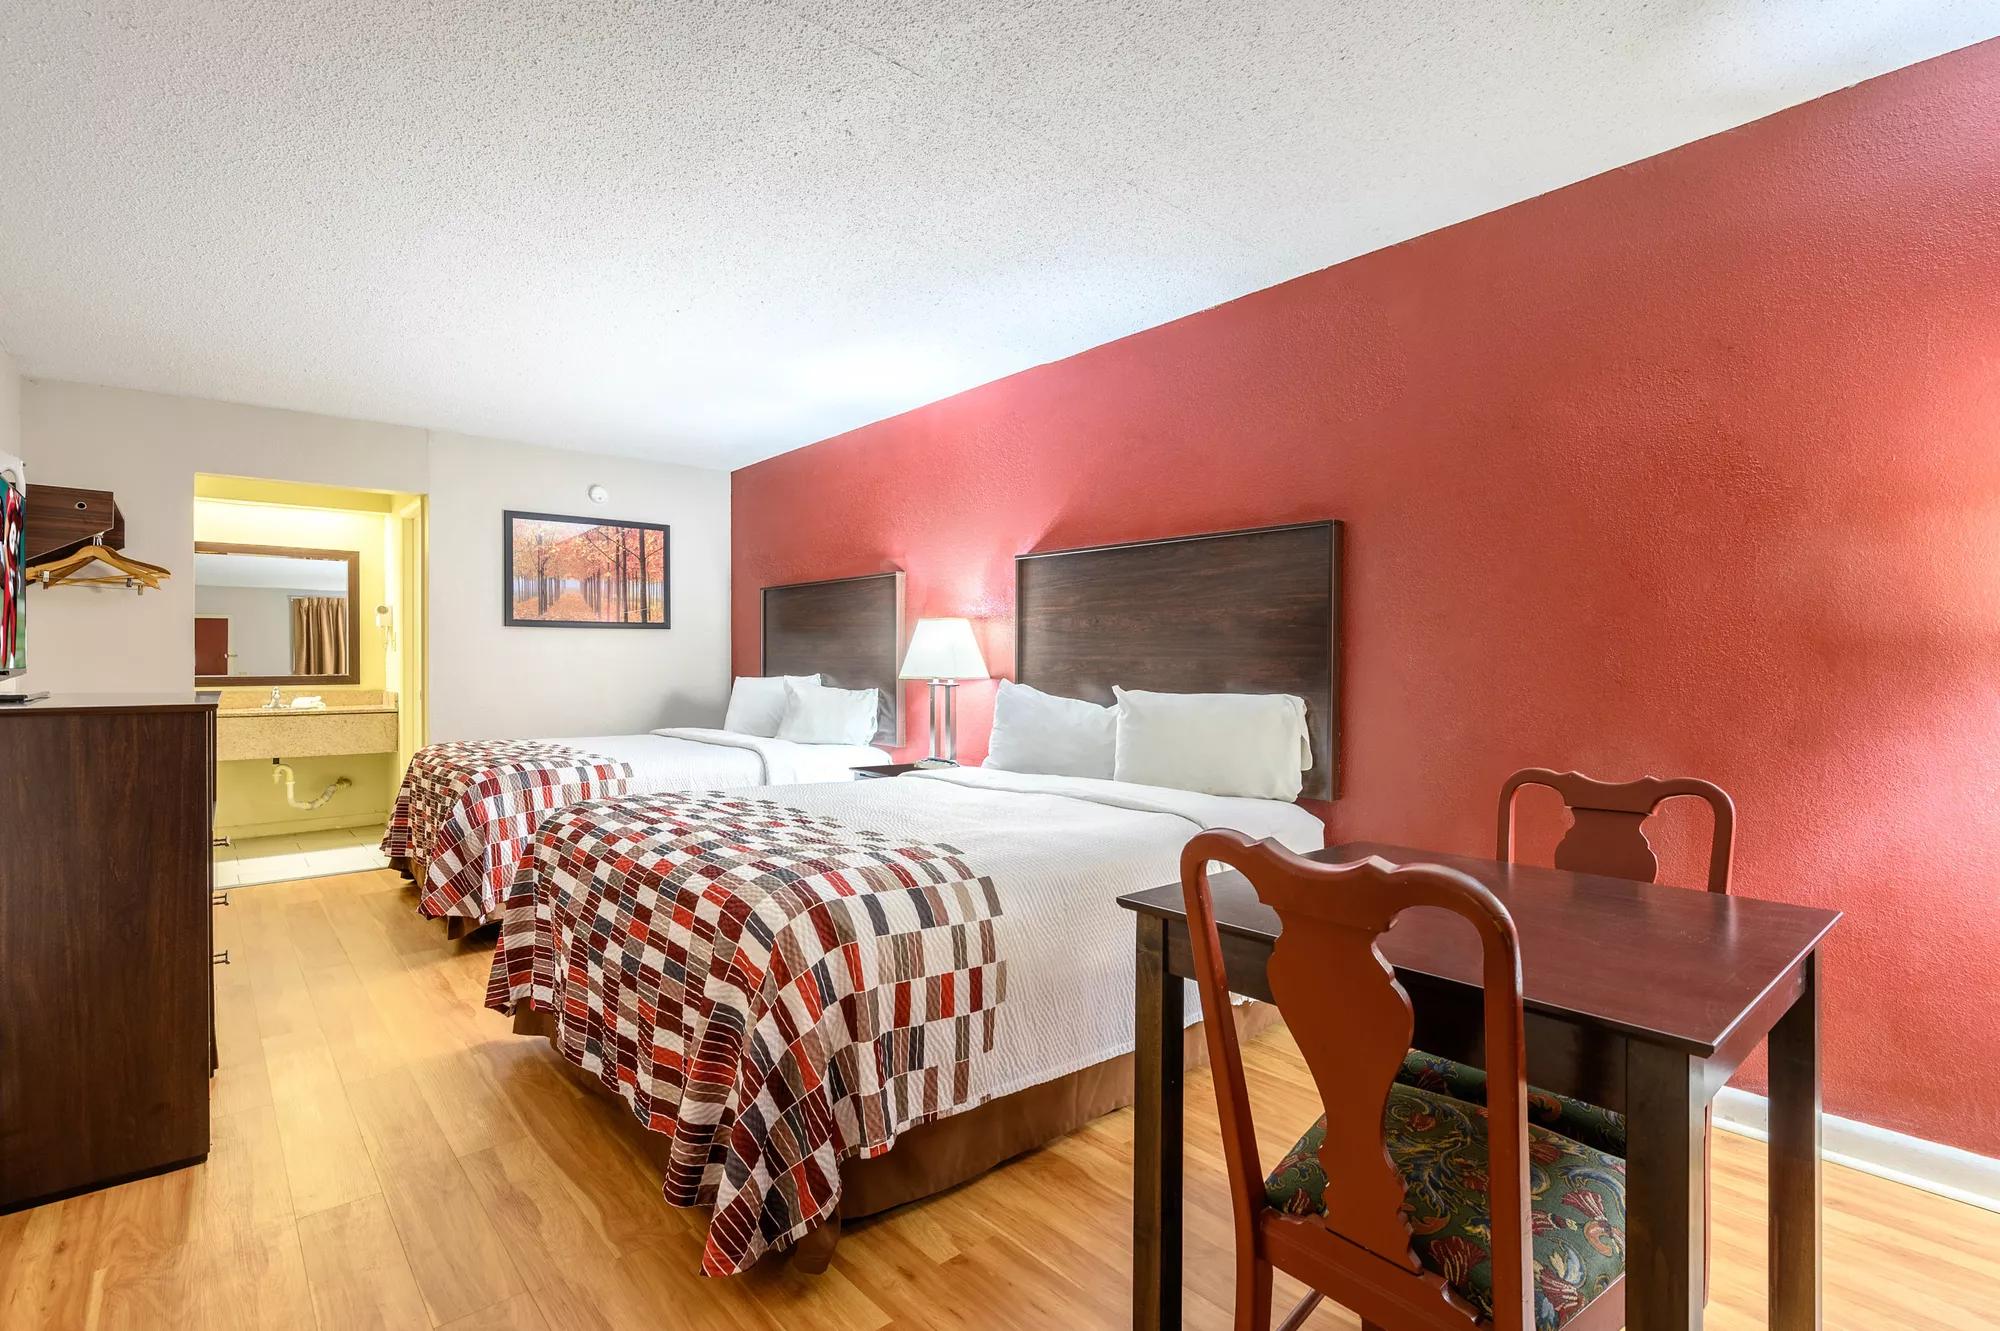 Red Roof Inn Sylacauga Double Bed Room Property Detail Image